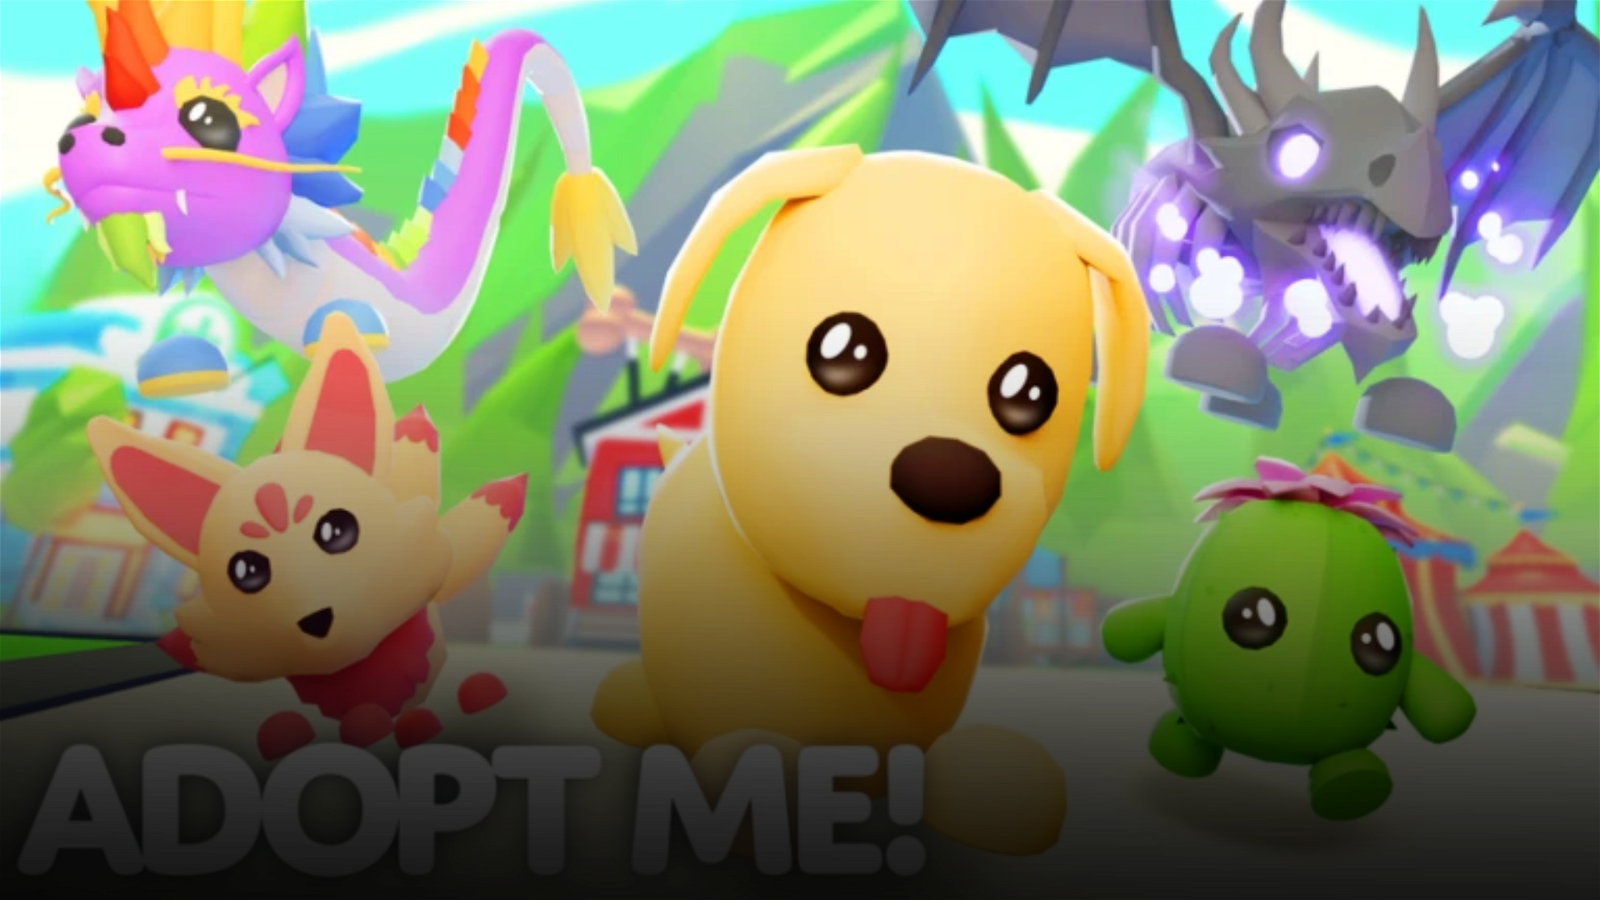 Roblox: How to Get the Best Pets in Adopt Me!